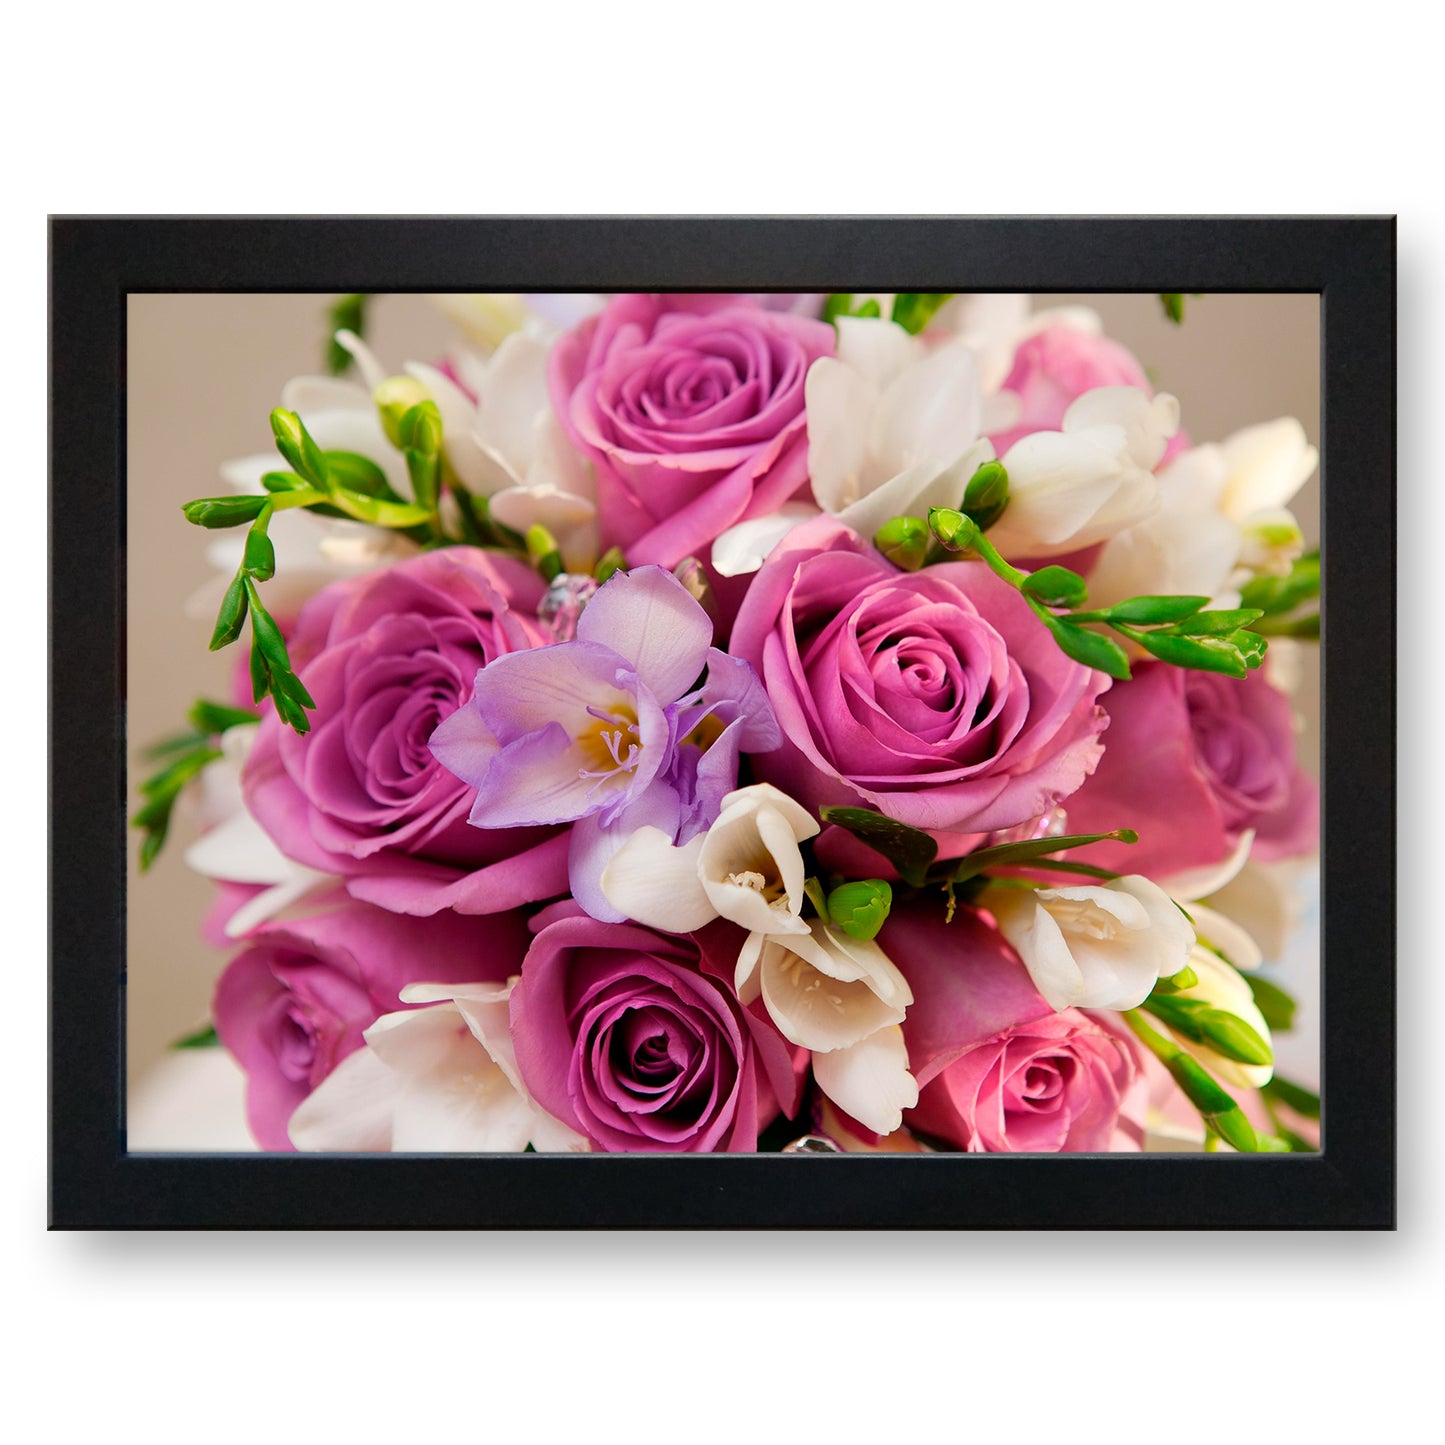 Bouquet of Flowers Cushioned Lap Tray